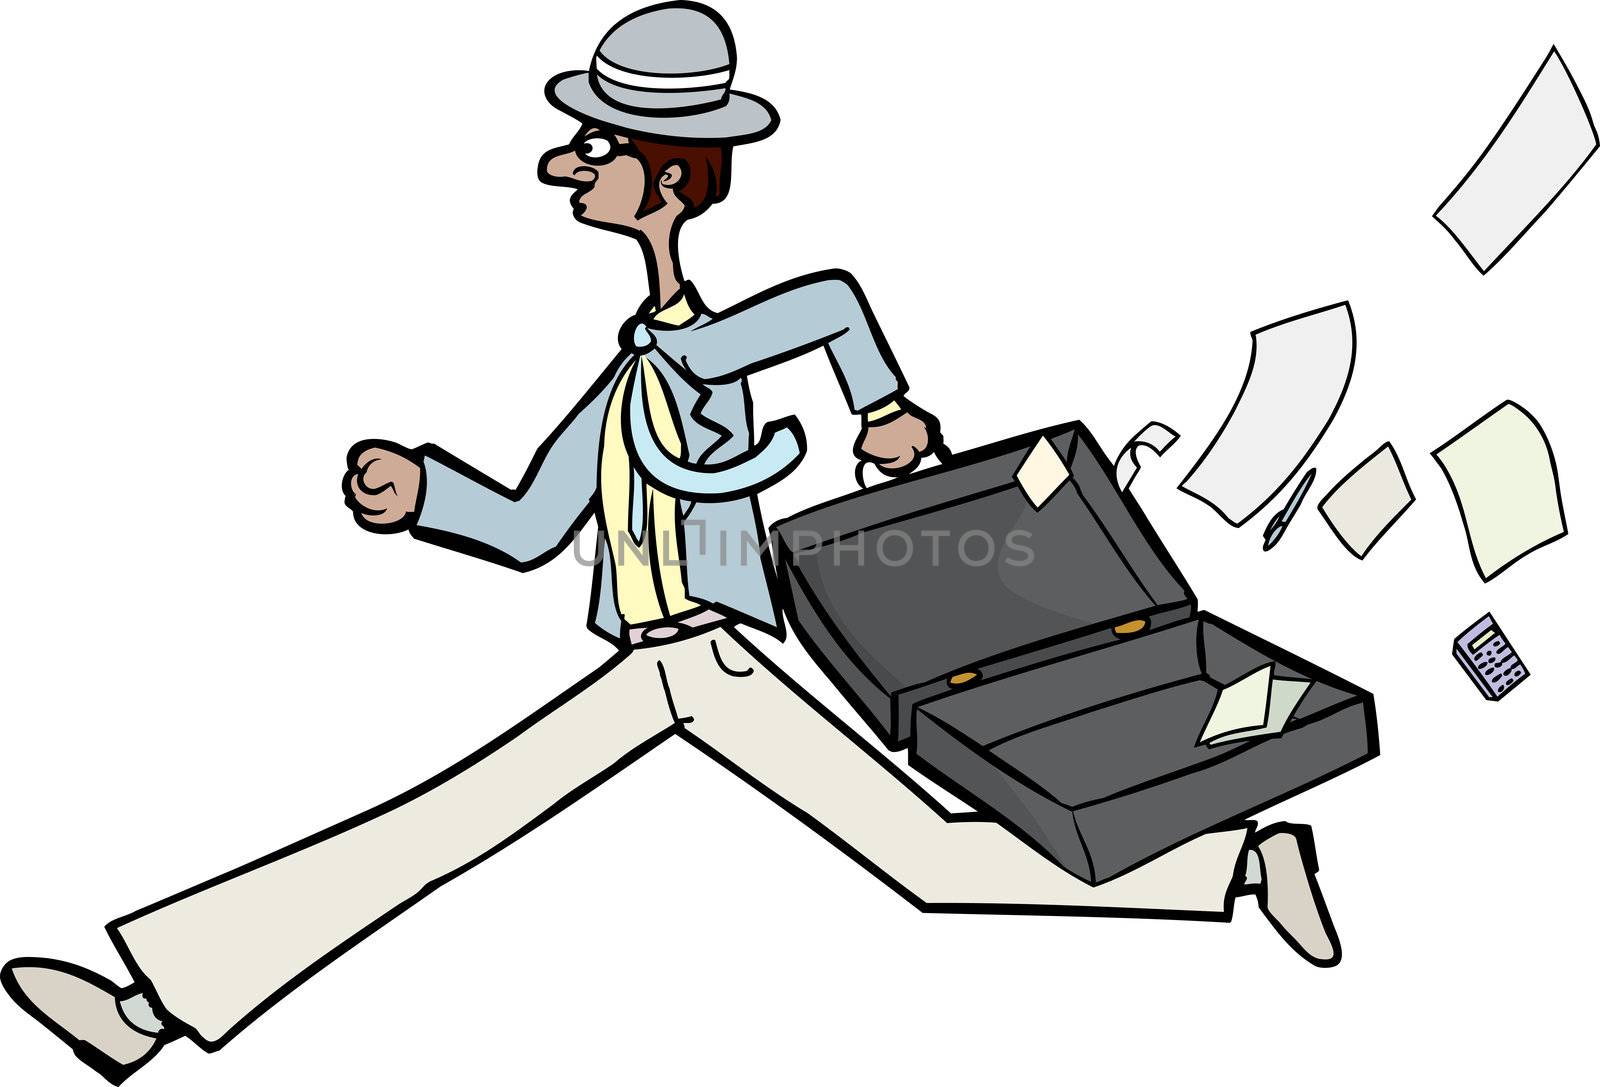 Running businessman with open briefcase and loose papers